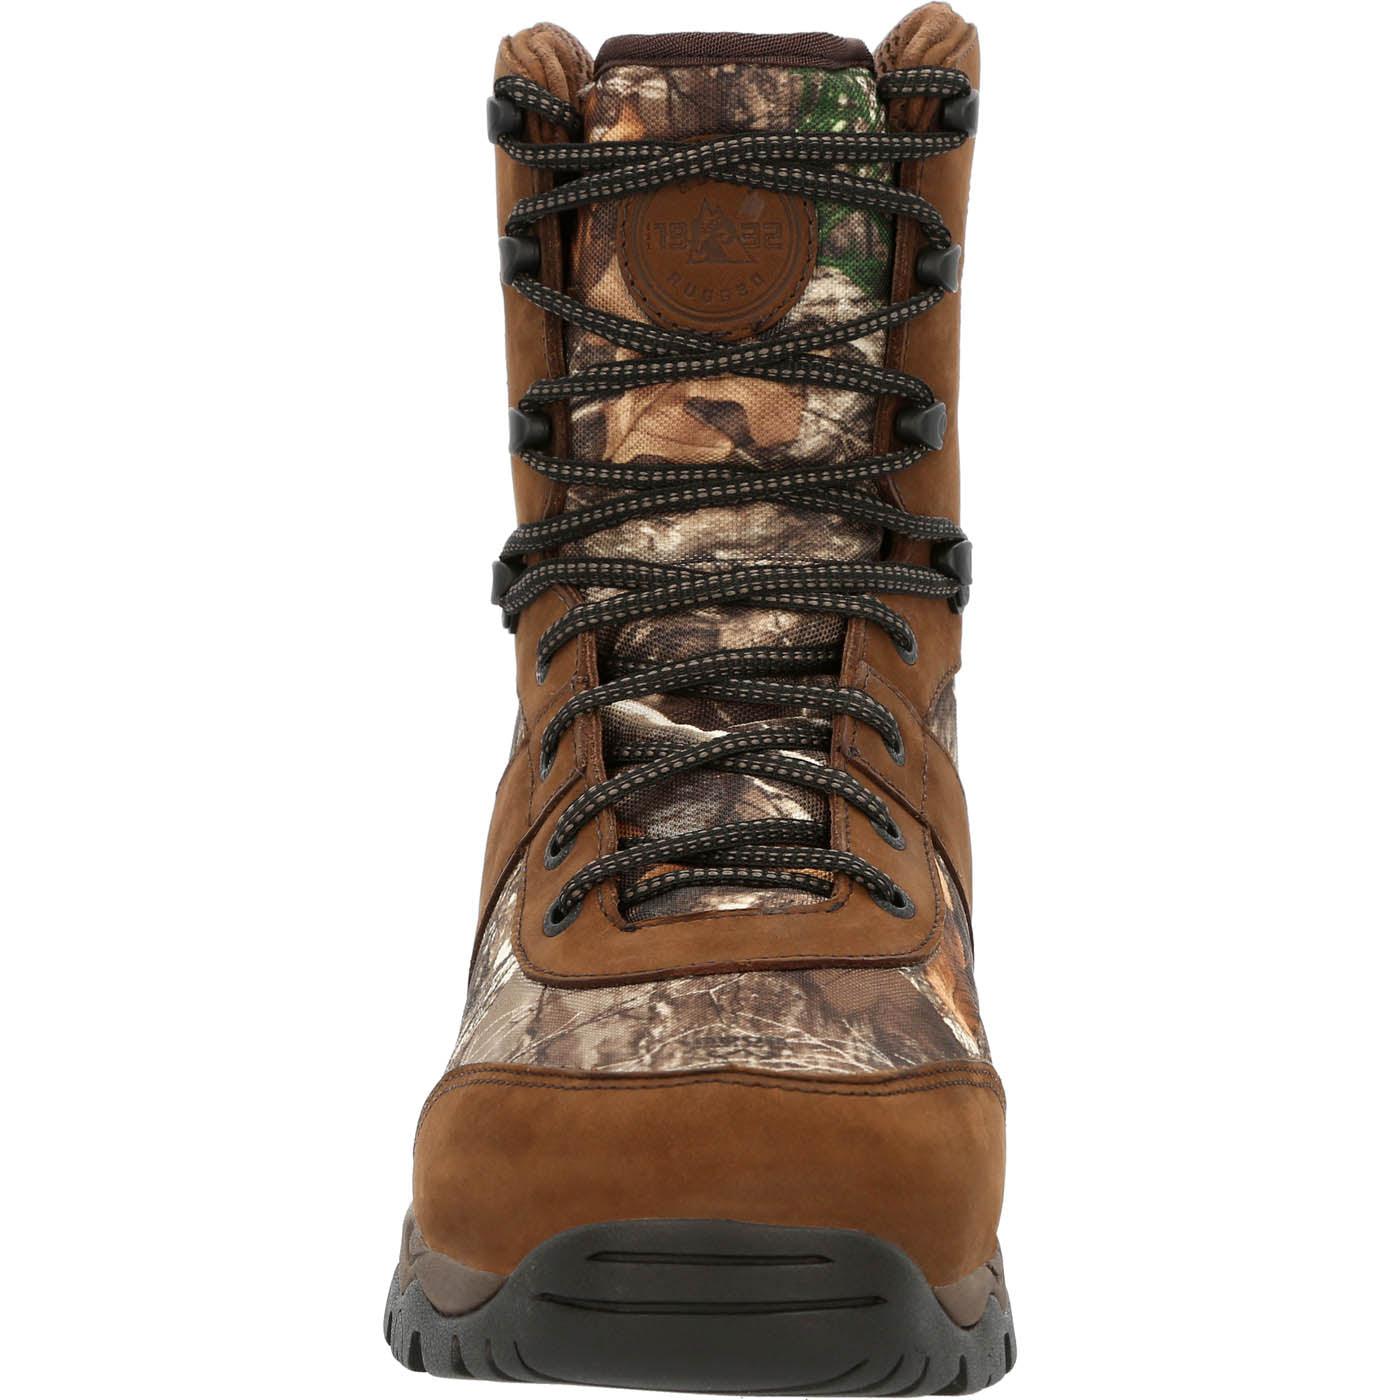 Rocky Red Mountain Waterproof 800g Insulated Outdoor Boot - Flyclothing LLC